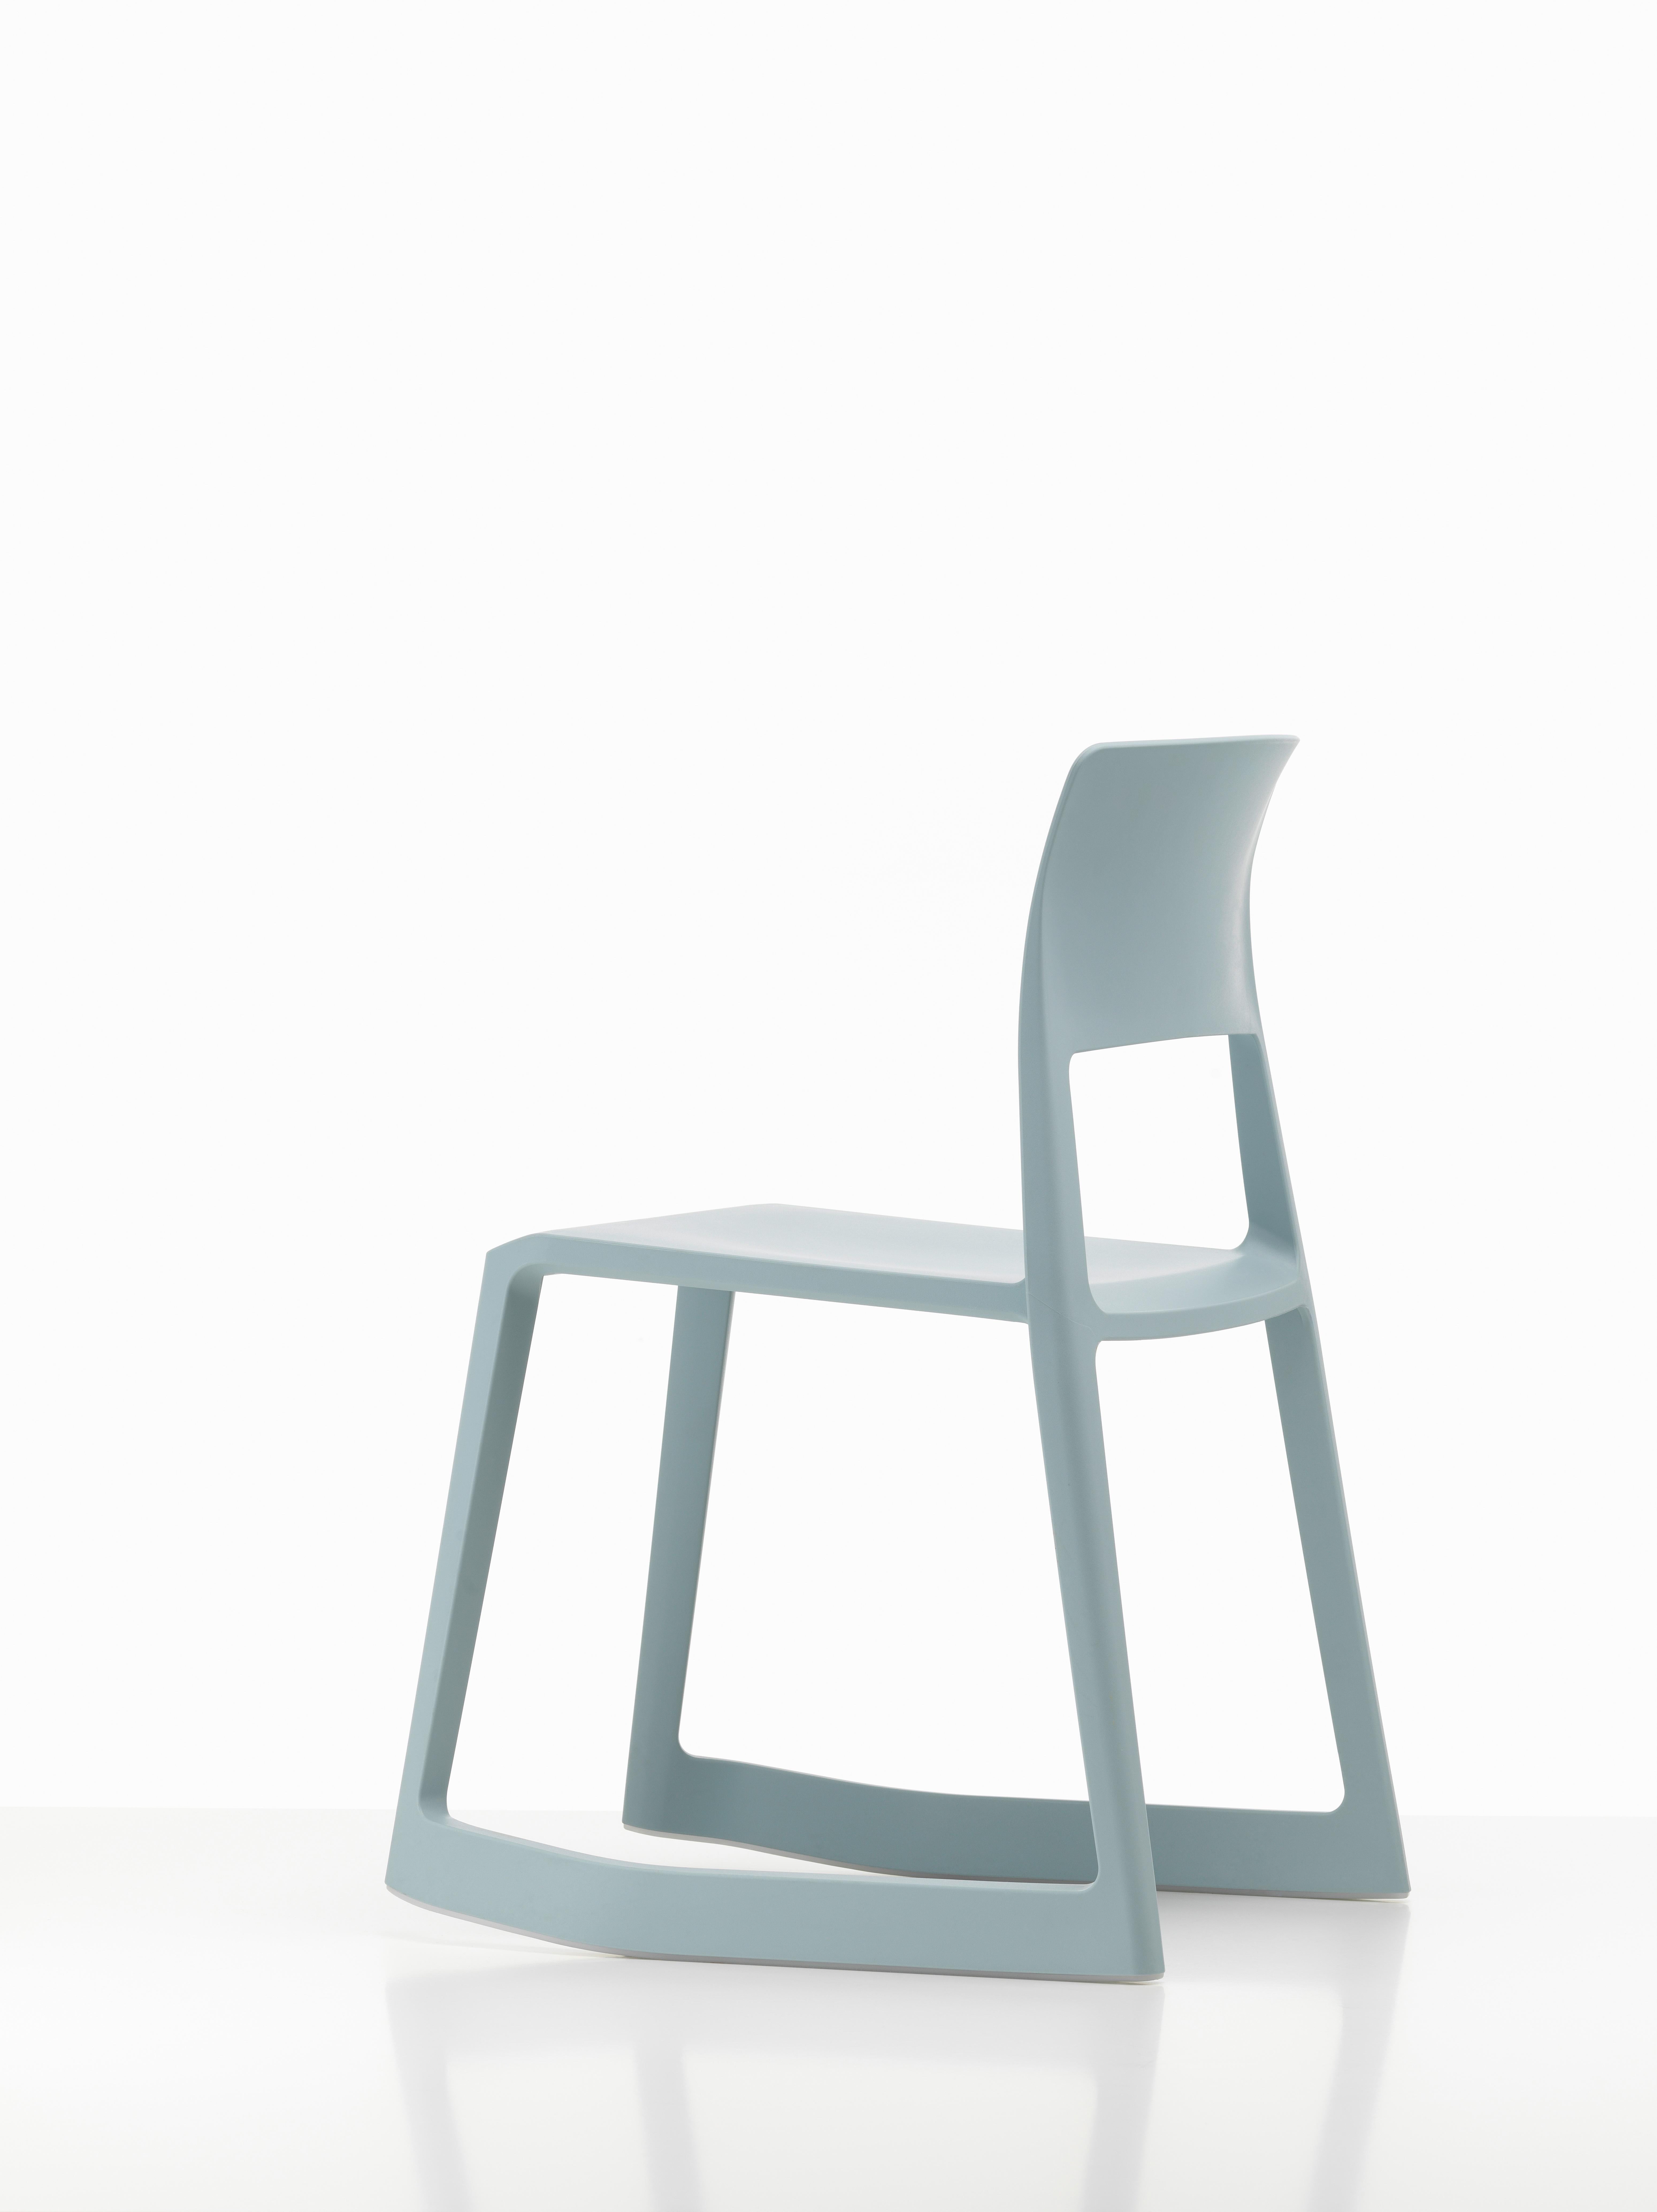 Modern Vitra Tip Ton Chair in Ice Gray Edward Barber & Jay Osgerby For Sale